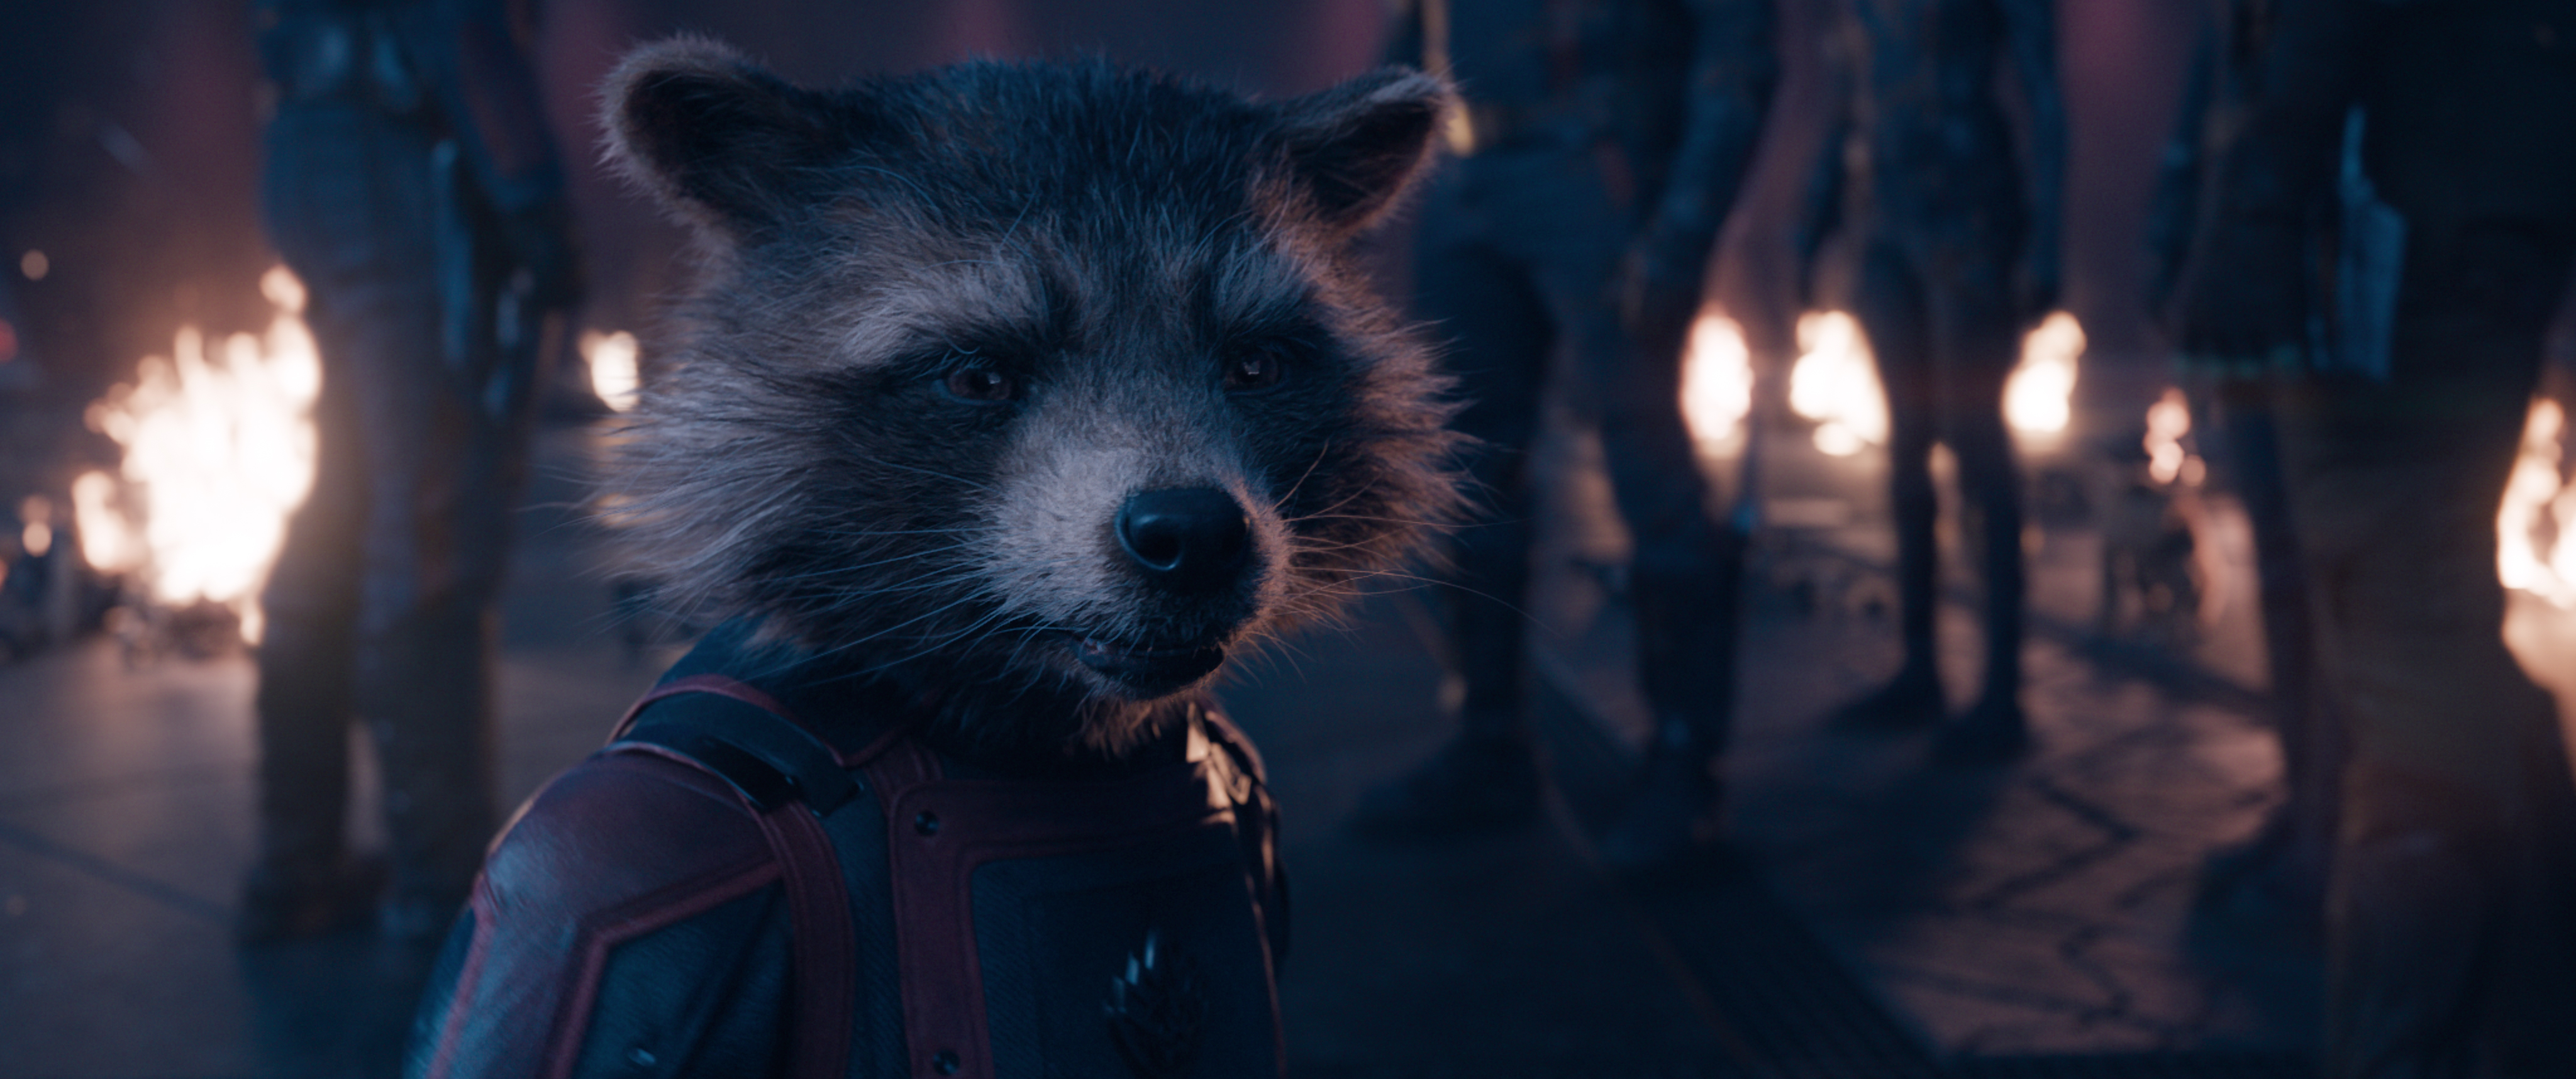 Rocket (voiced by Bradley Cooper) in Marvel Studios' Guardians of the Galaxy Vol. 3. Photo courtesy of Marvel Studios. © 2023 MARVEL.